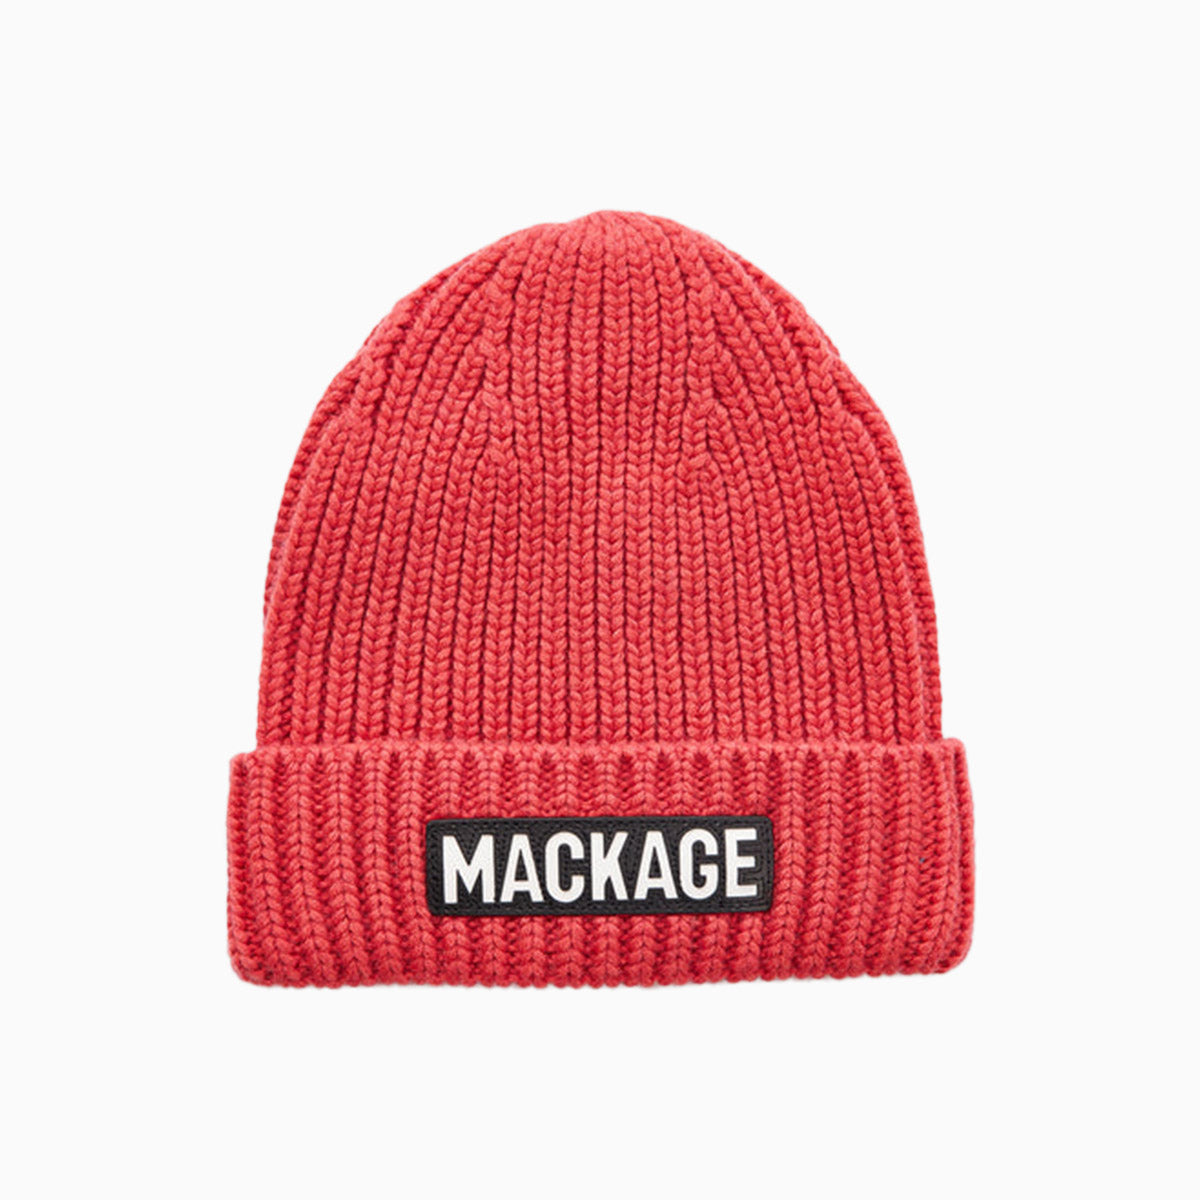 mackage-kids-jude-k-hand-knit-toque-with-ribbed-cuffbeanie-hat-jude-k-punch